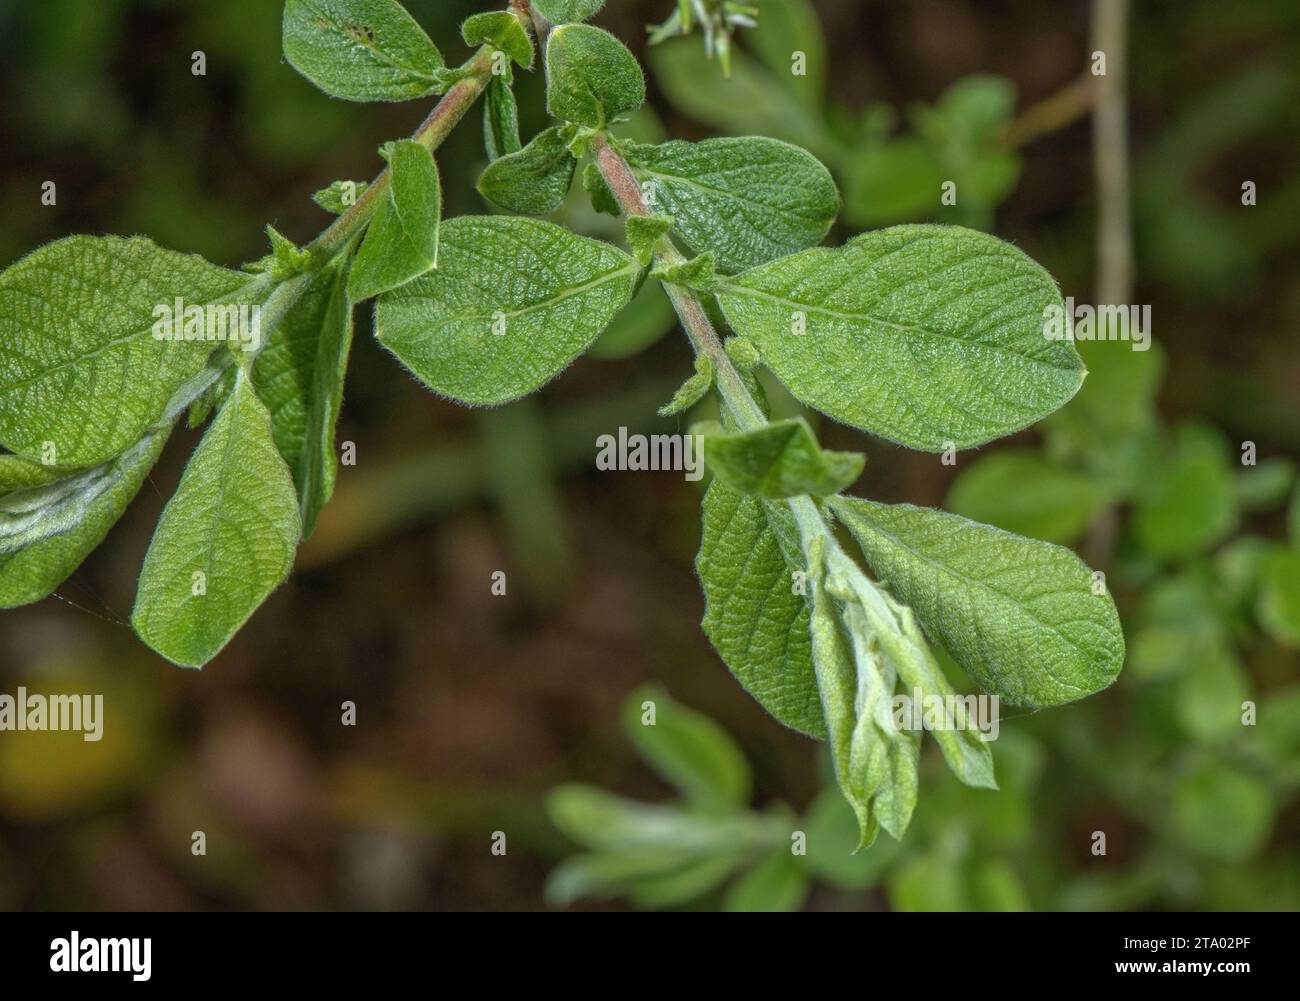 Eared willow, Salix aurita foliage, with rugose leaves, and stipules. Stock Photo